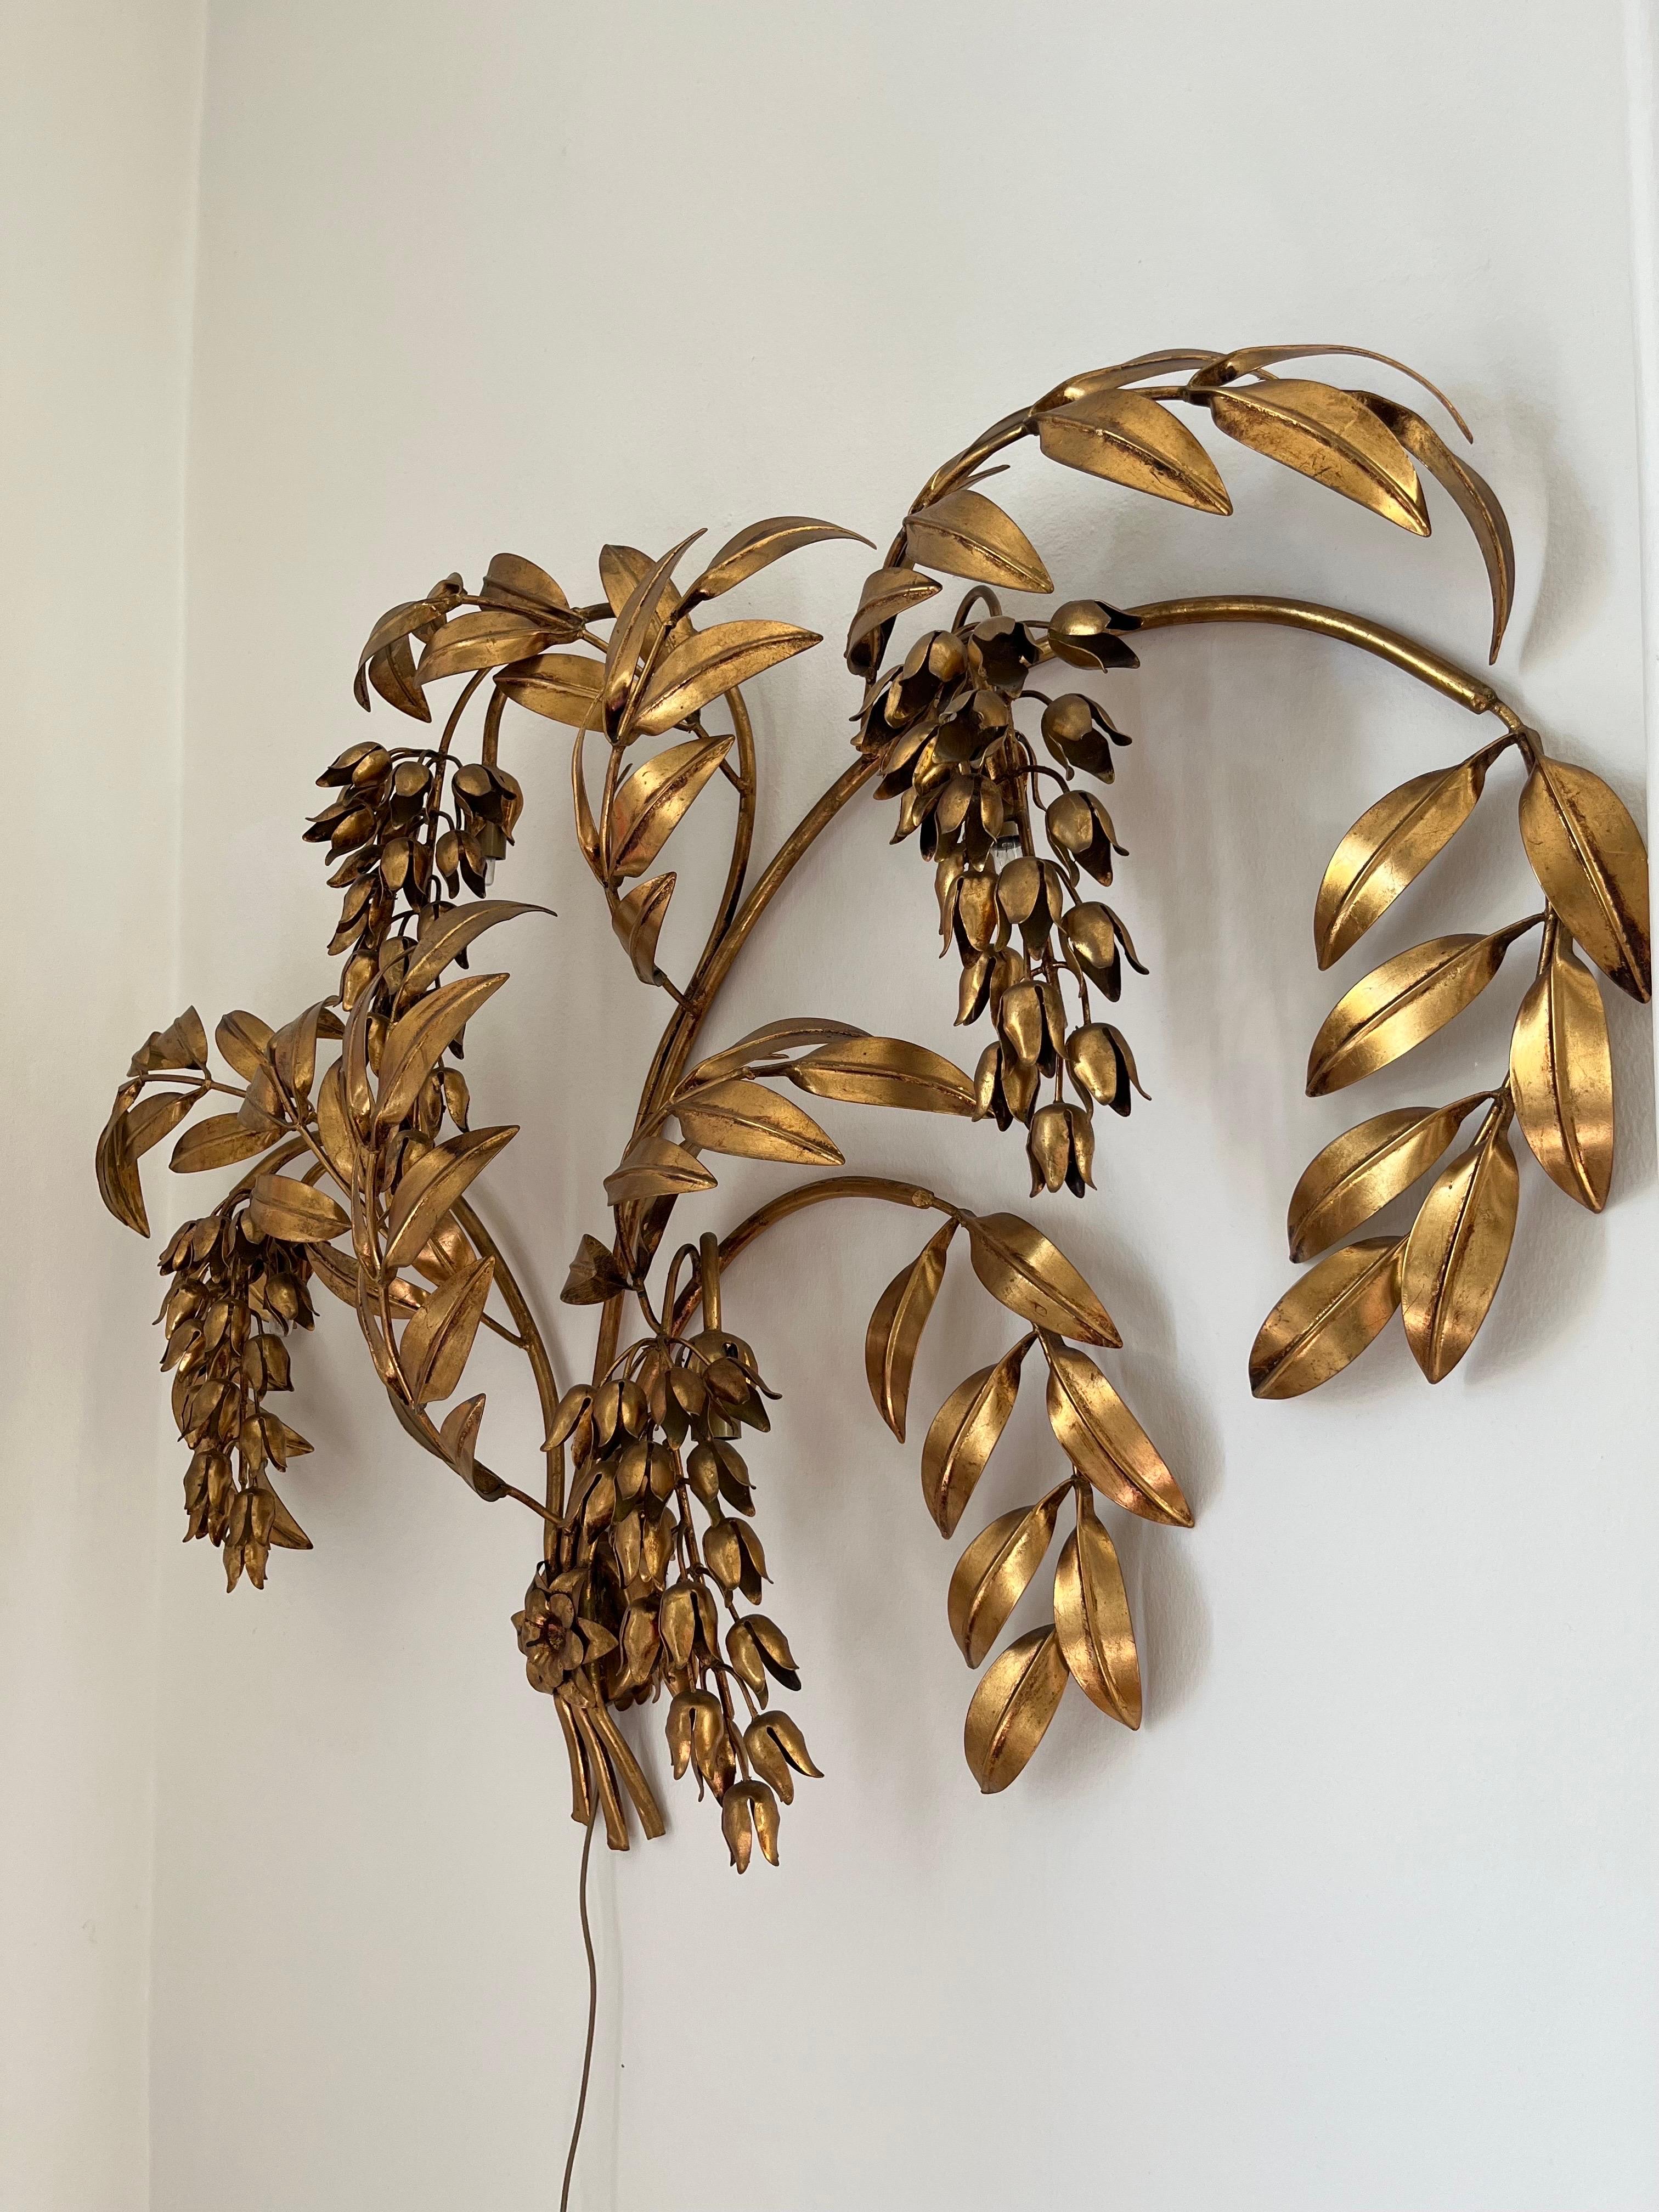 Large and truly stunning and glamorous Hollywood Regency style wall sconce / lamp attributed to Hans Kögl, model Piaggio d’Oro.
Impressive and high quality piece in lacquered brass, great craftmanship. Made by a gortler, each small brass piece has